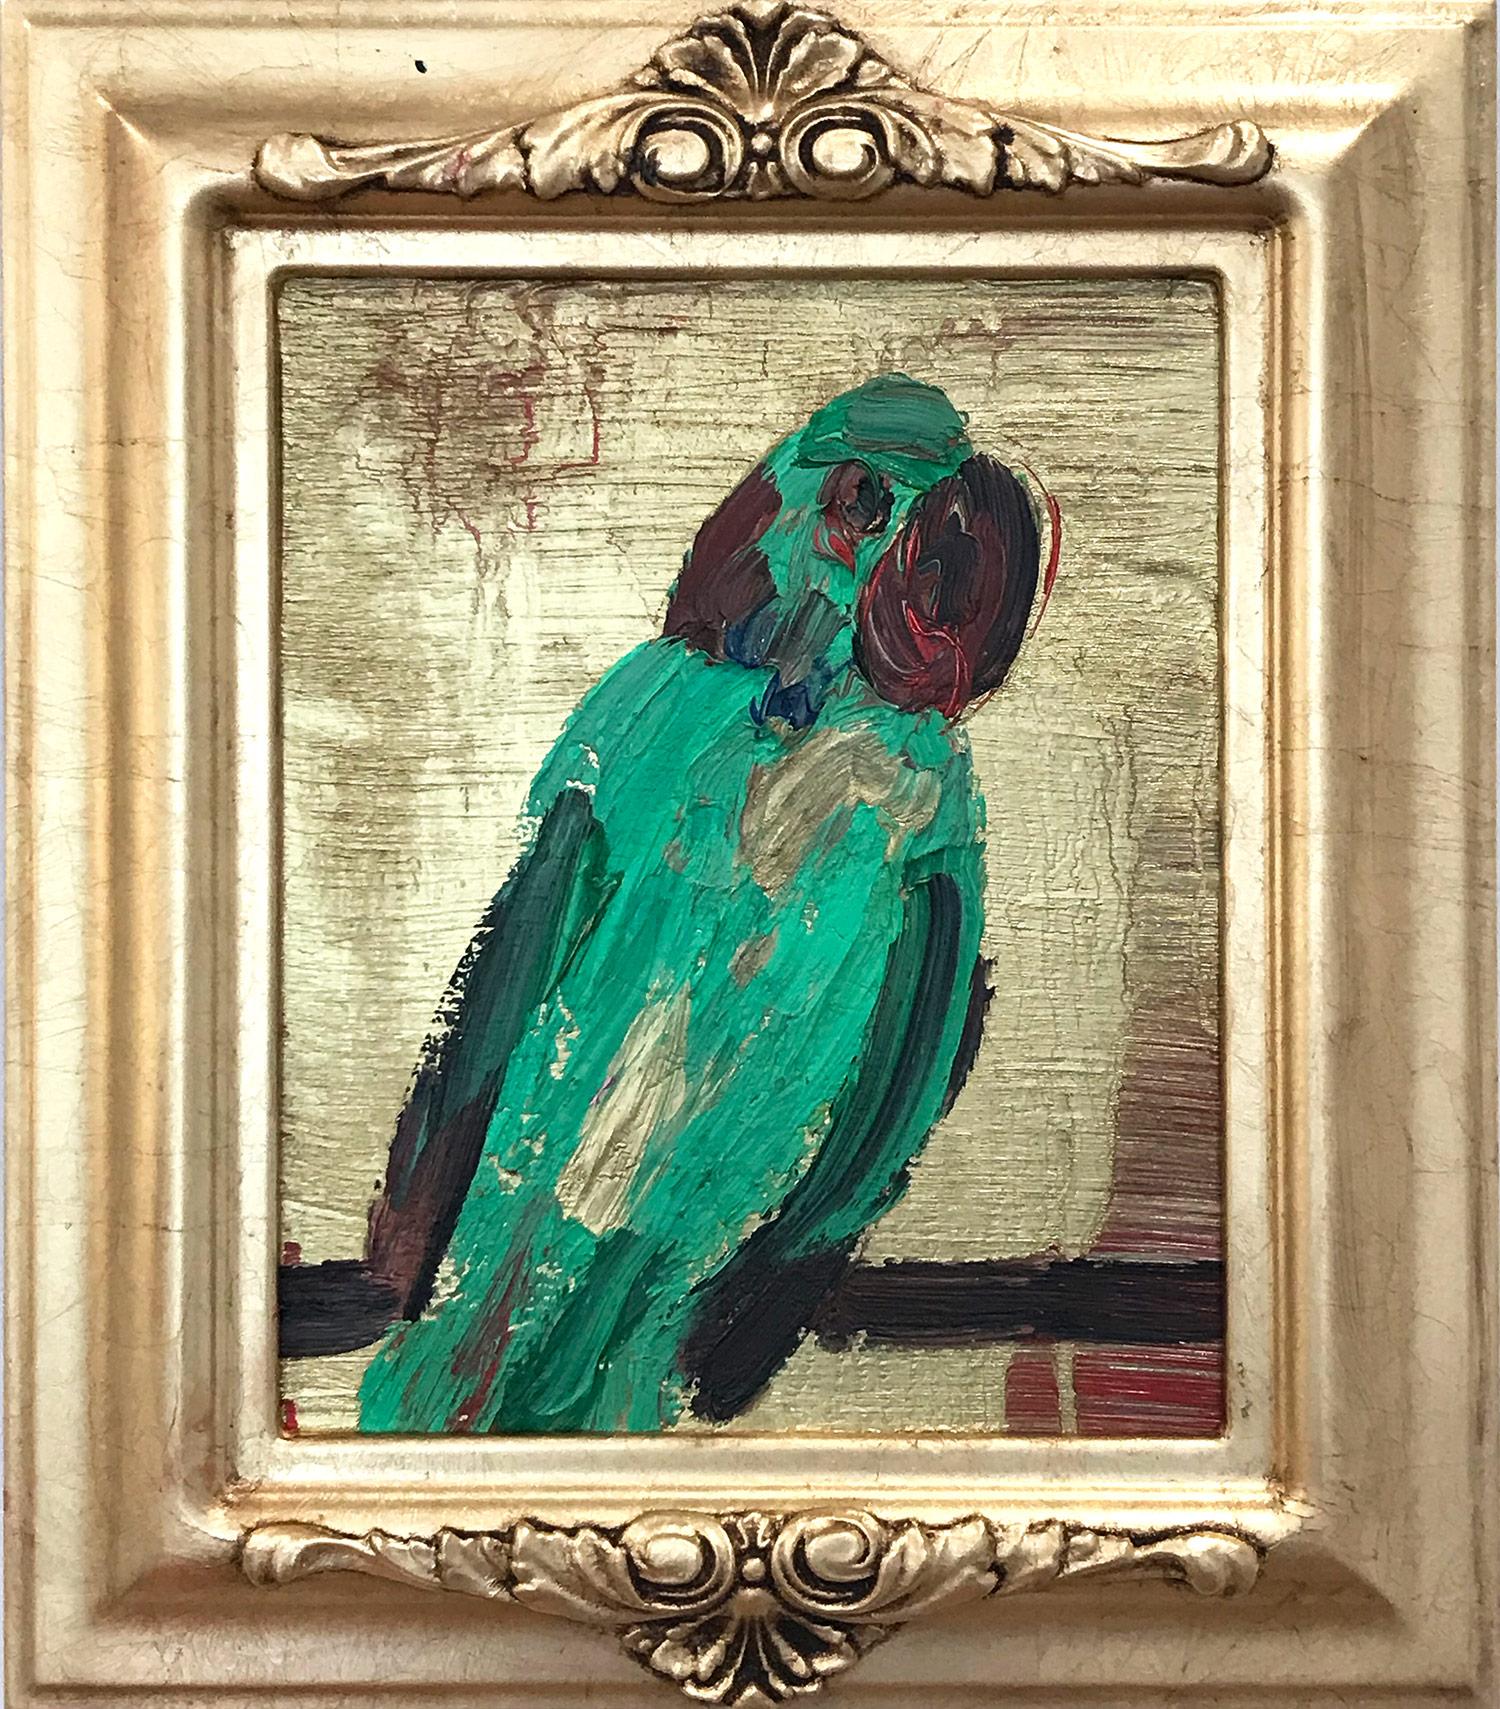 Hunt Slonem Abstract Painting - "Parrot" (Green Parrot with Gold Background on Wood Panel)